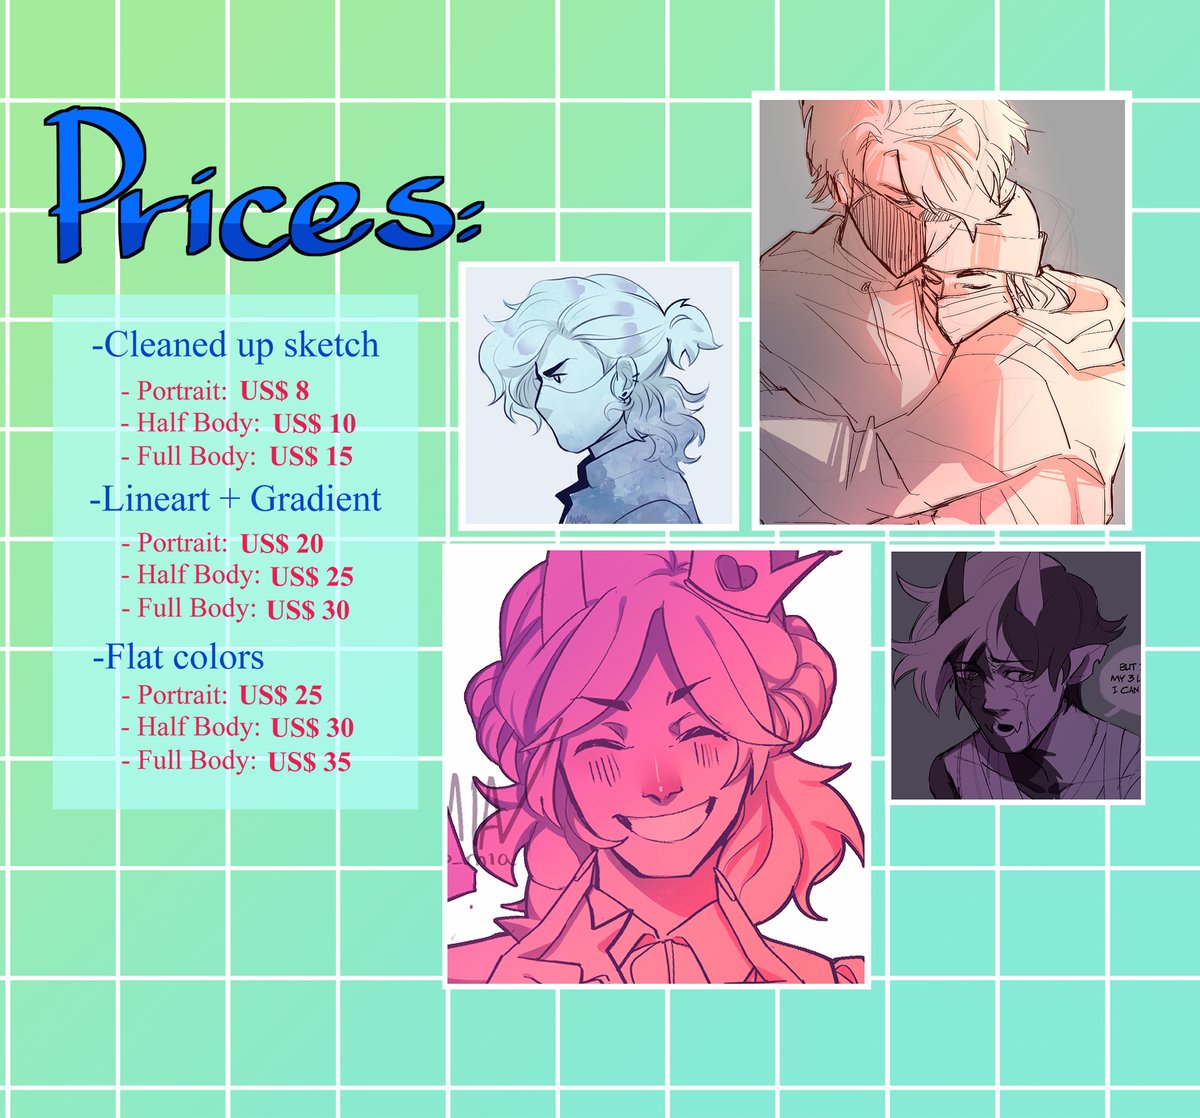 ⭐️Cοmmissiοηs are OPEN!⭐️

3 slots available! DM me if you are interested :D
Rts are appreciated!
ALL DETAILS: https://t.co/yi3dcBKXUi 